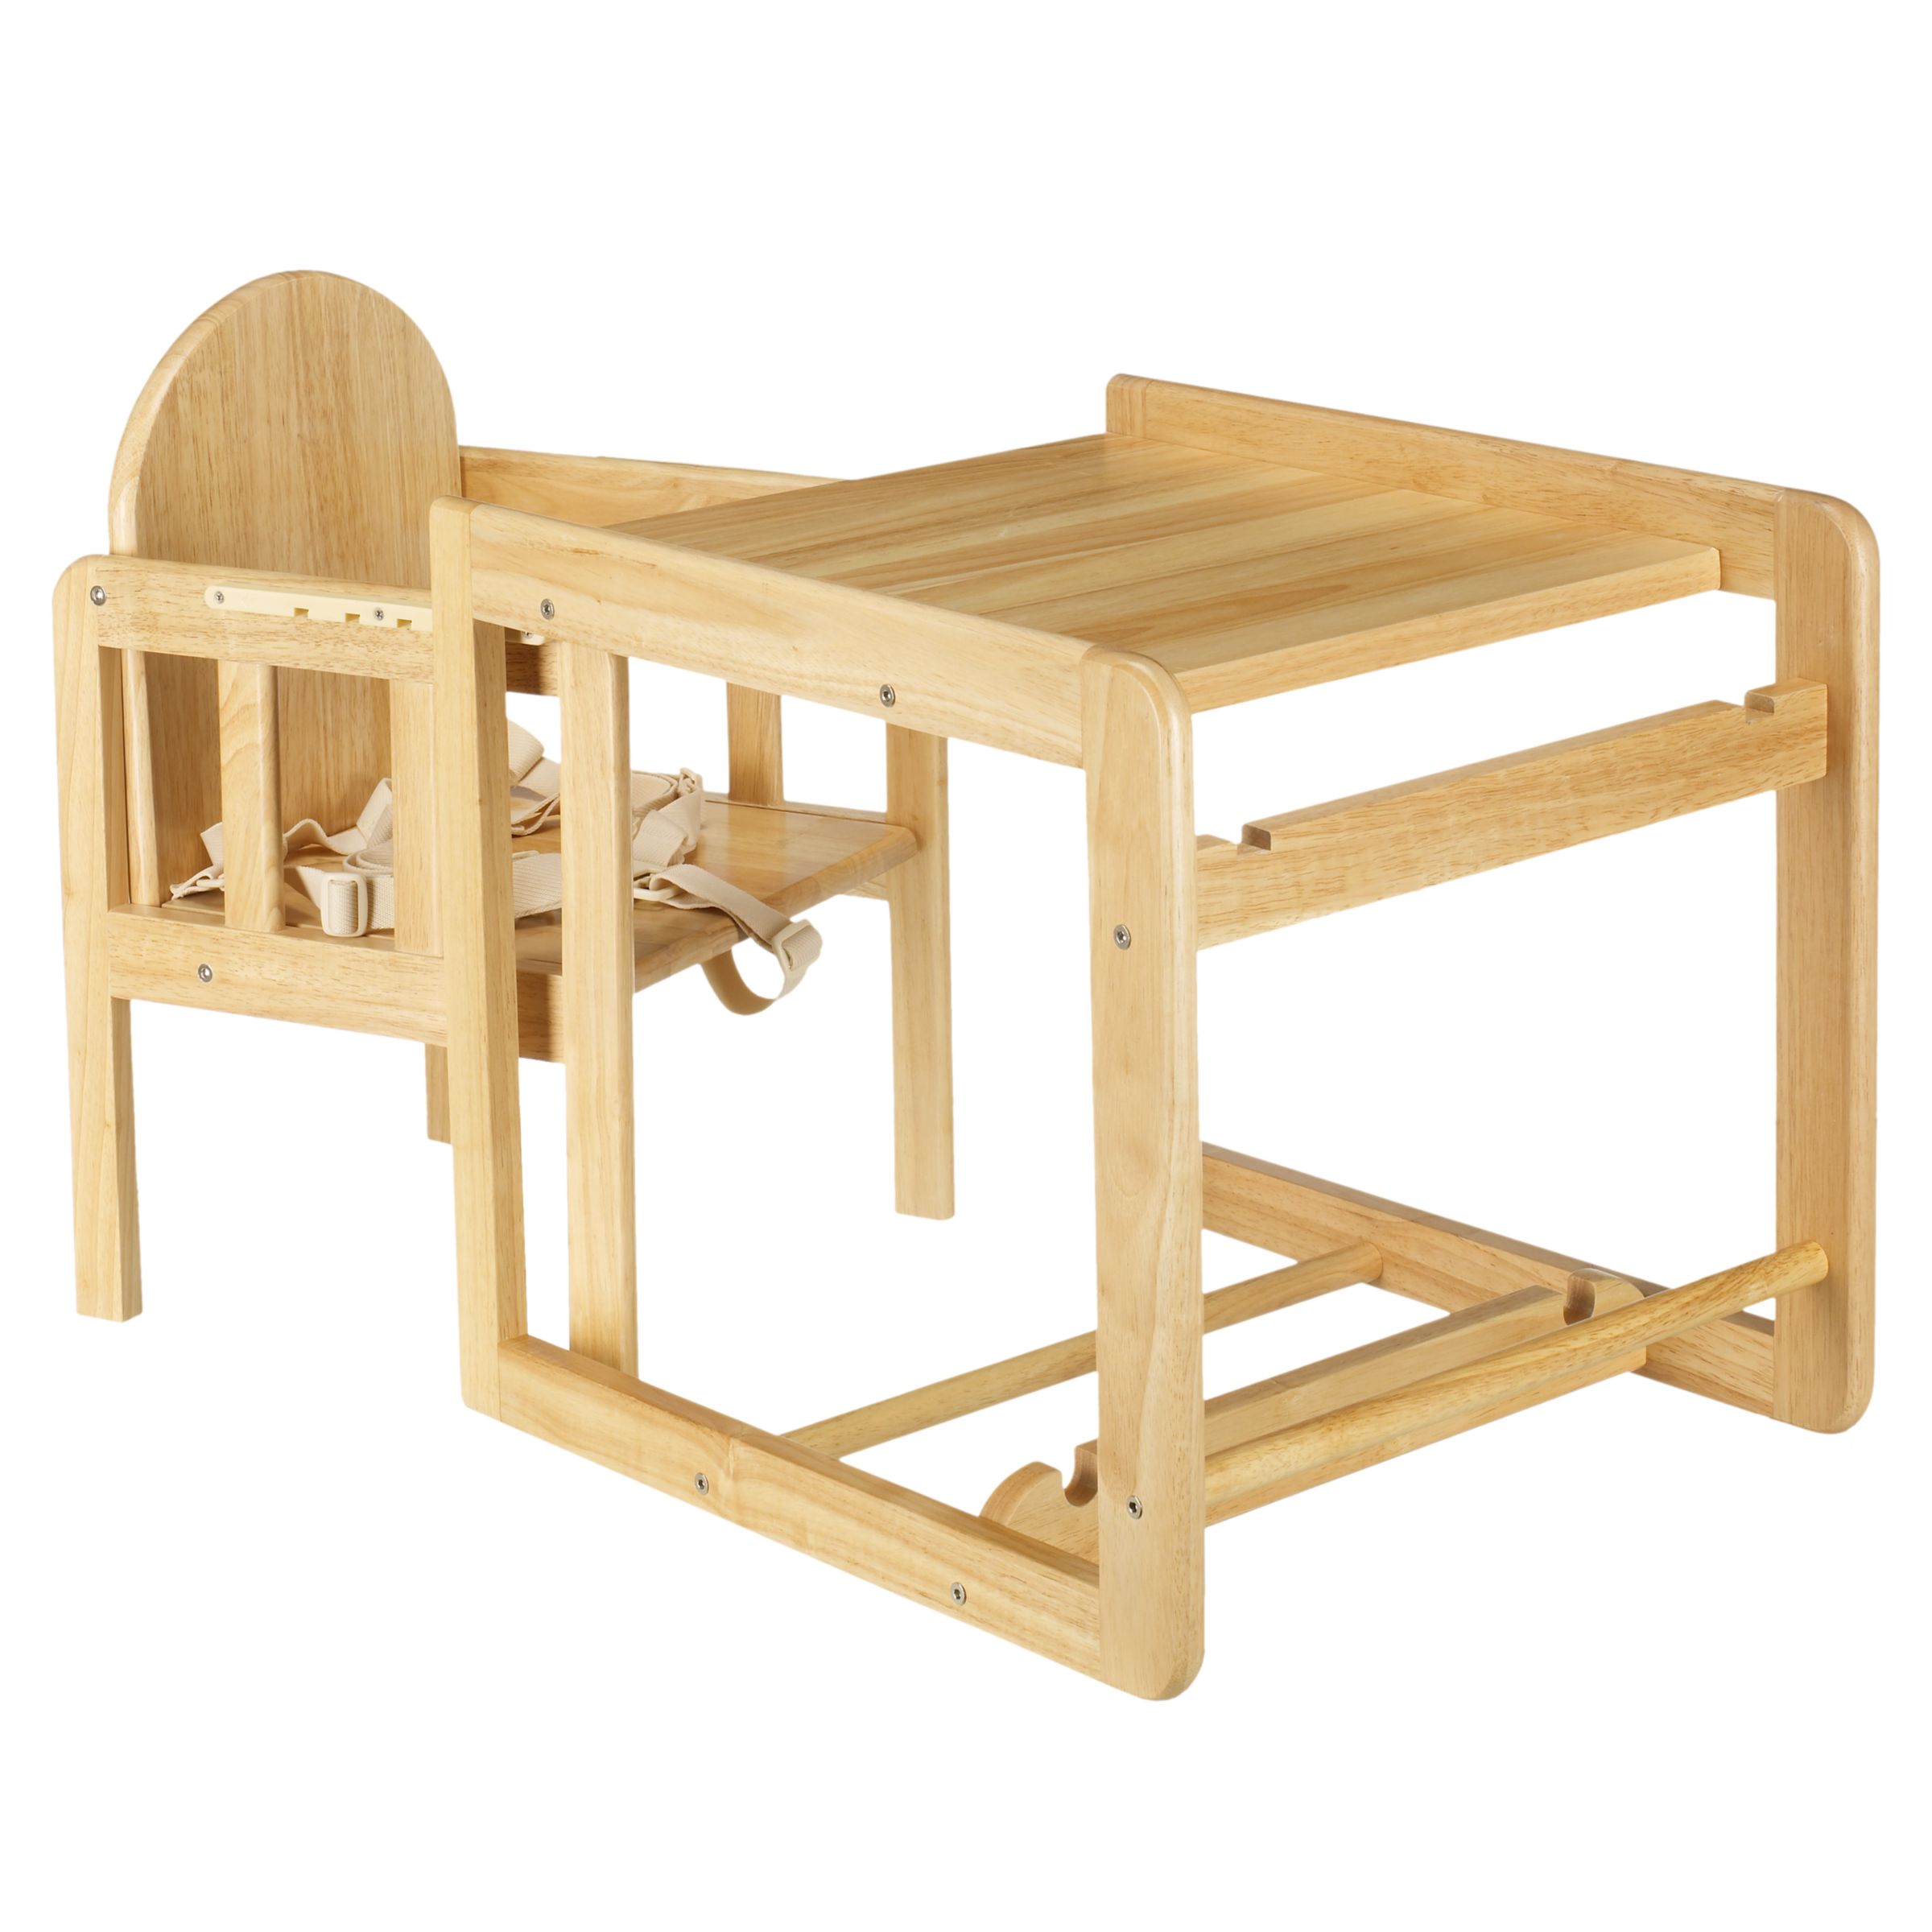 wooden high chair converts to table and chair